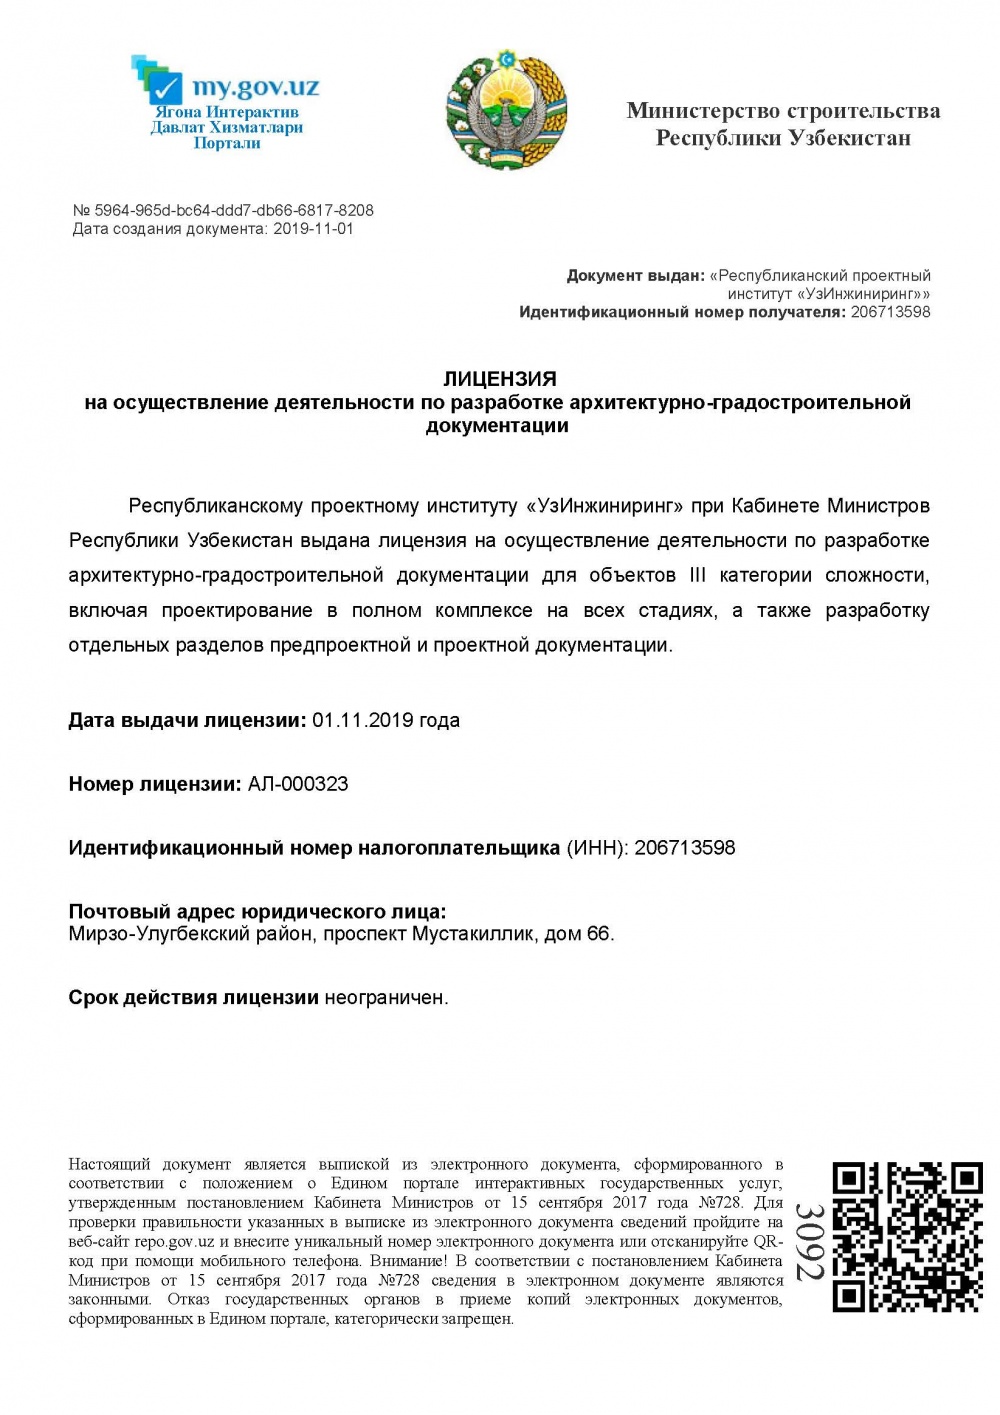 License of the Ministry of Construction of the Republic of Uzbekistan